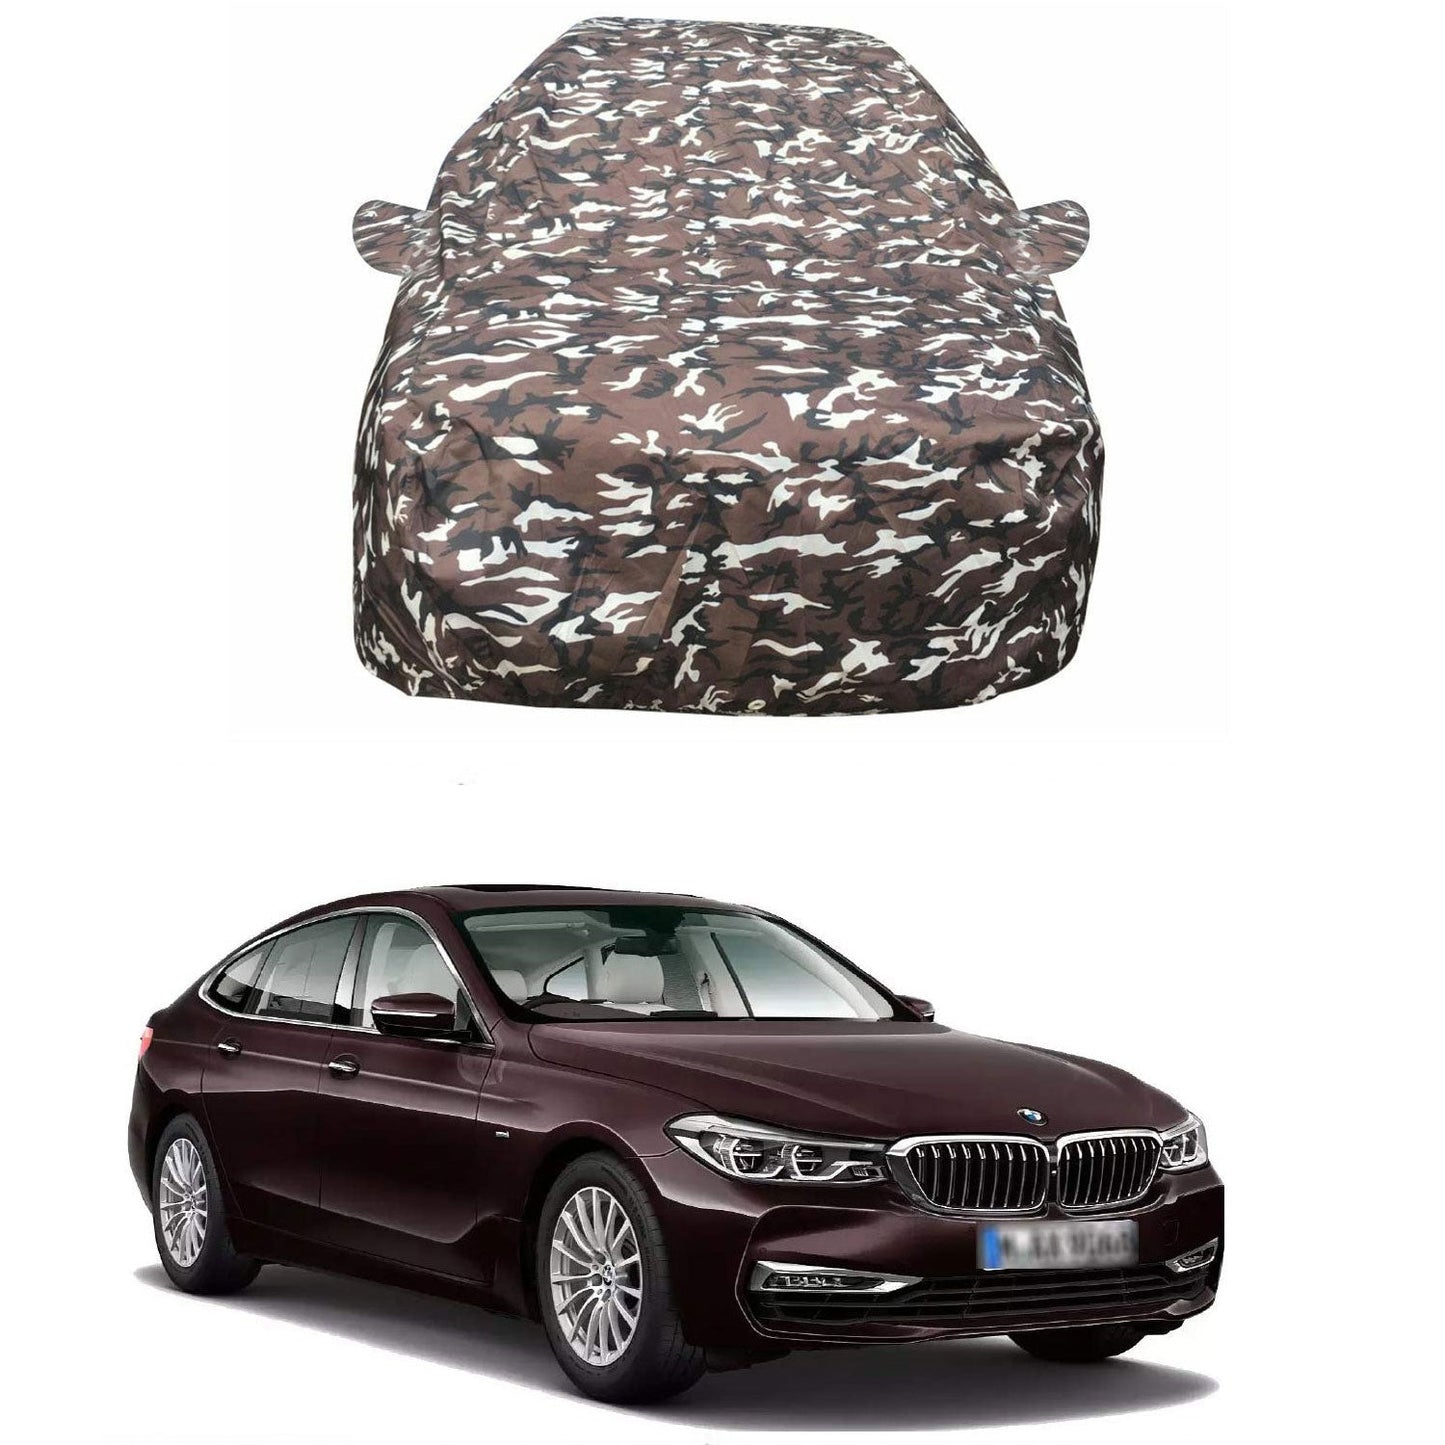 Oshotto Ranger Design Made of 100% Waterproof Car Body Cover with Mirror Pockets For BMW 6GT